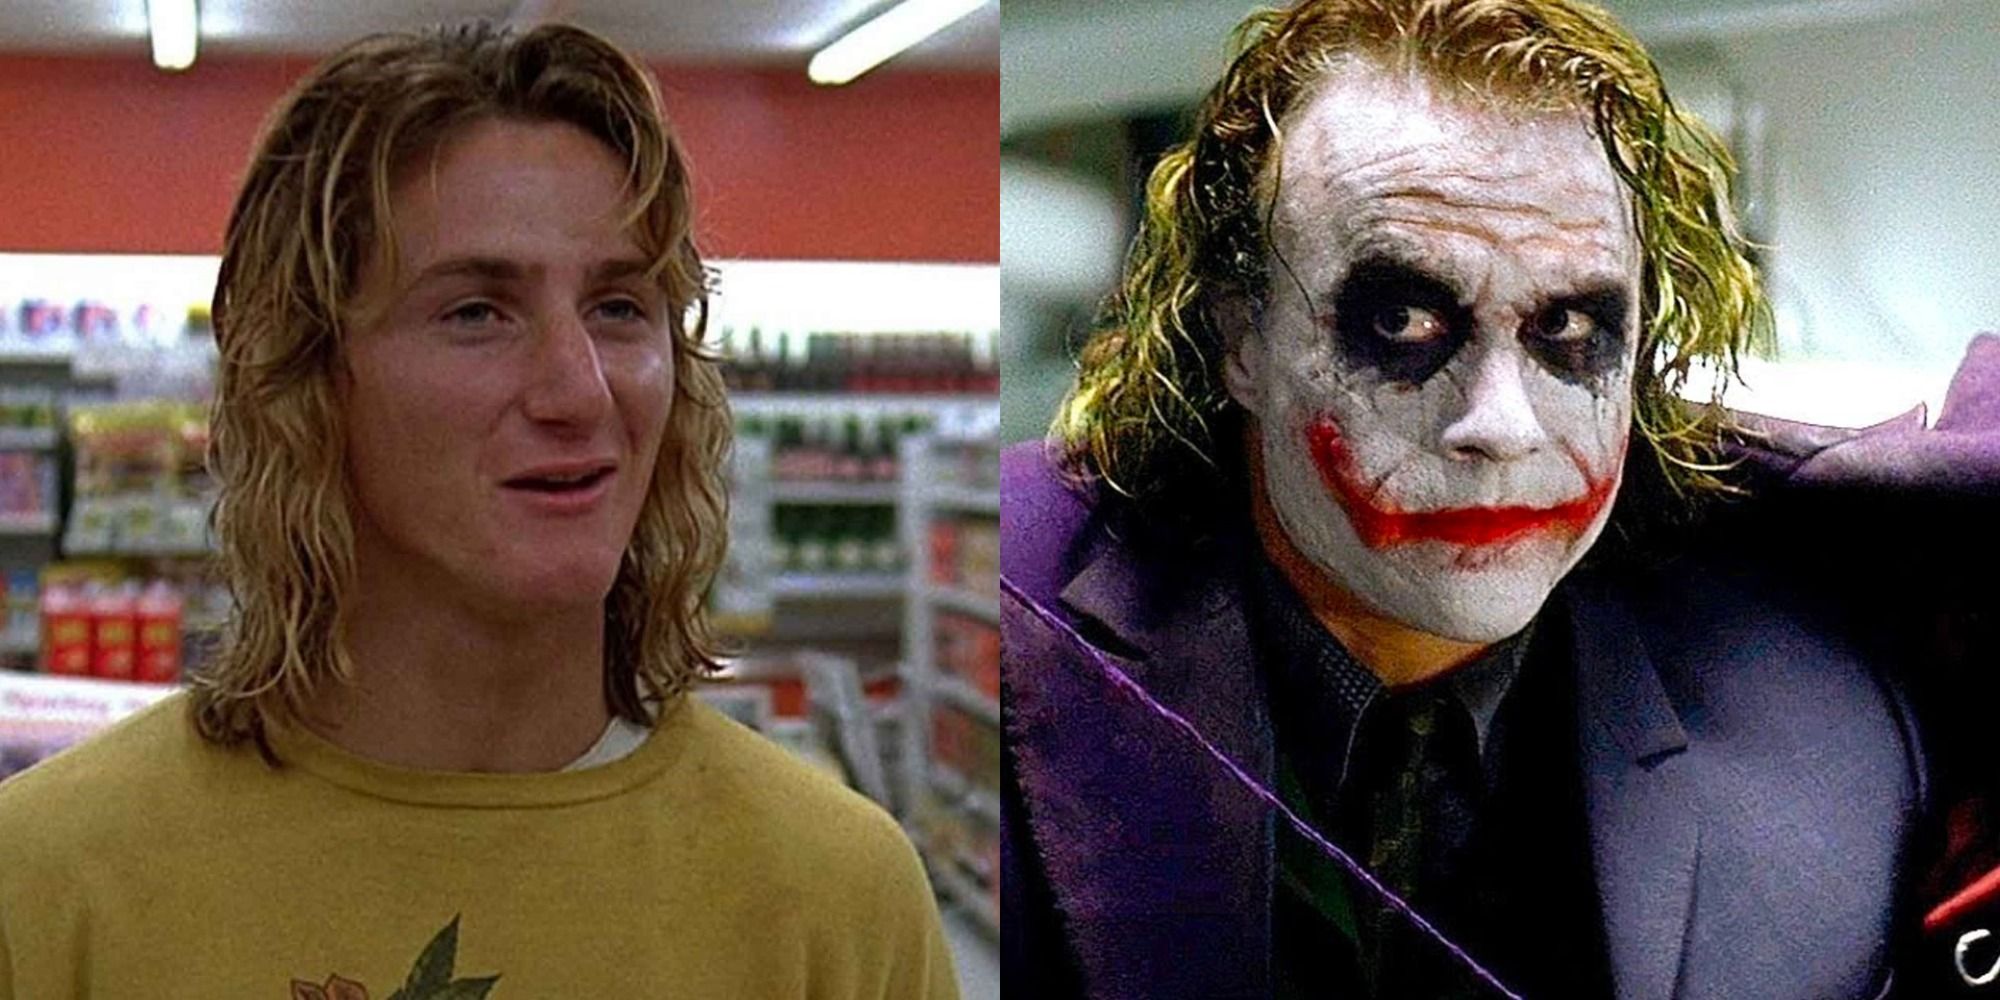 Split image of Sean Penn in Fast Times at Ridgemont High and Heath Ledger in The Dark Knight